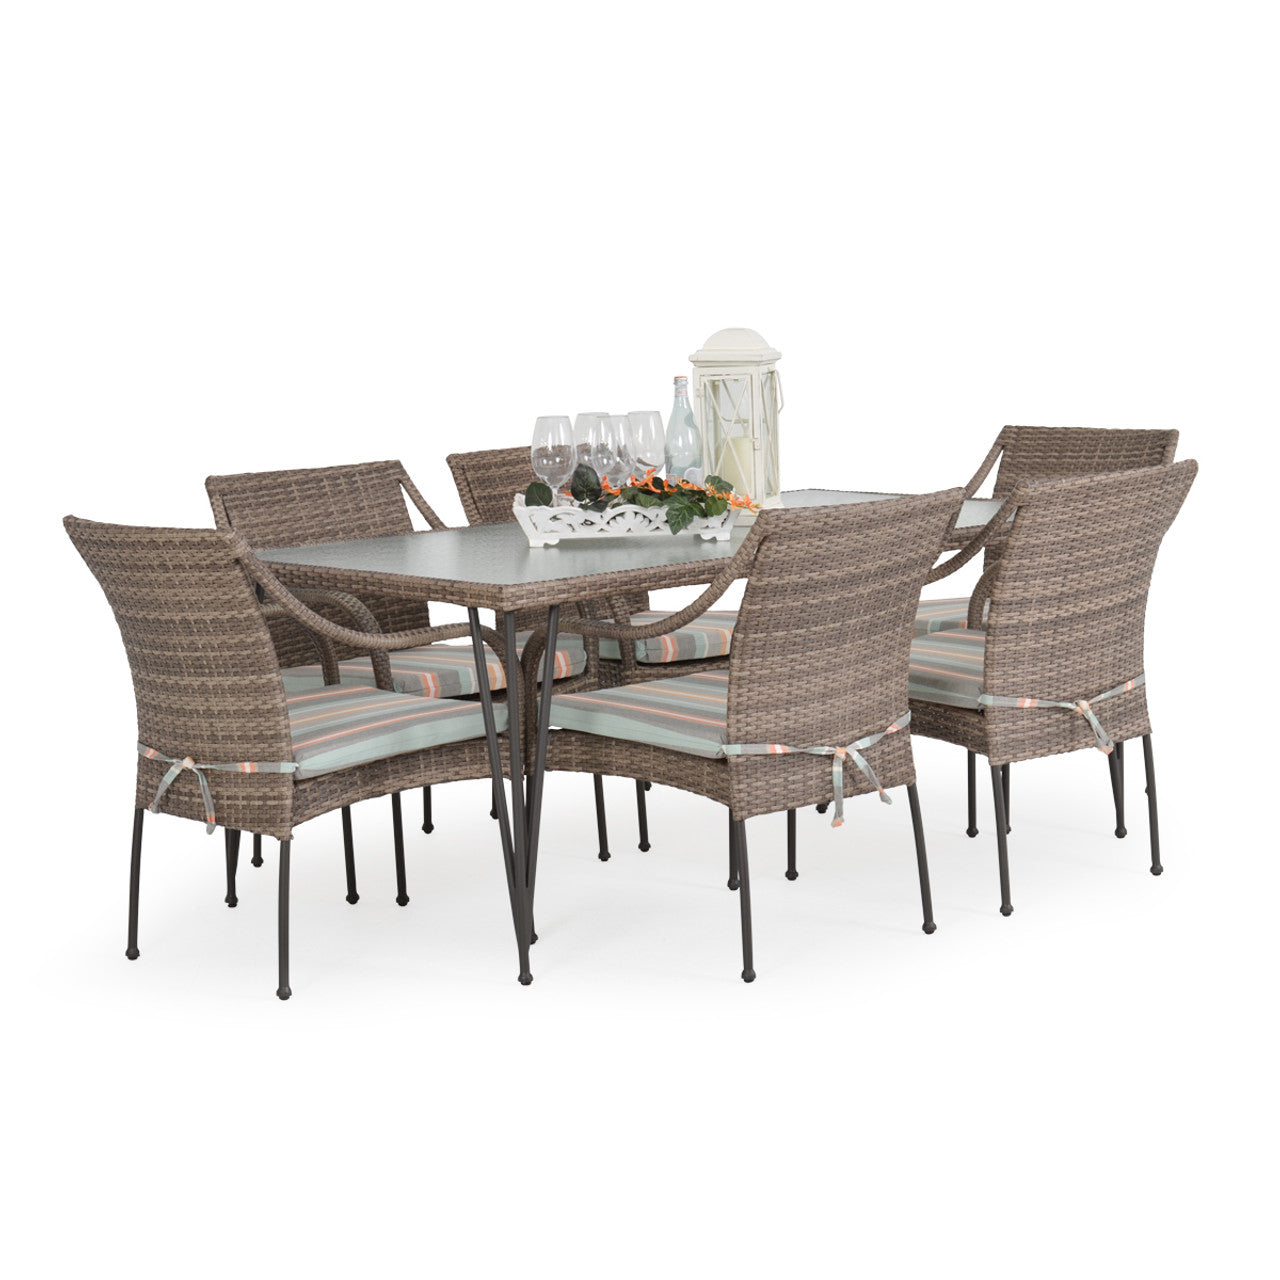 Leaders Furniture Garden Terrace Outdoor Wicker 39" x 68" Rectangle Dining Table